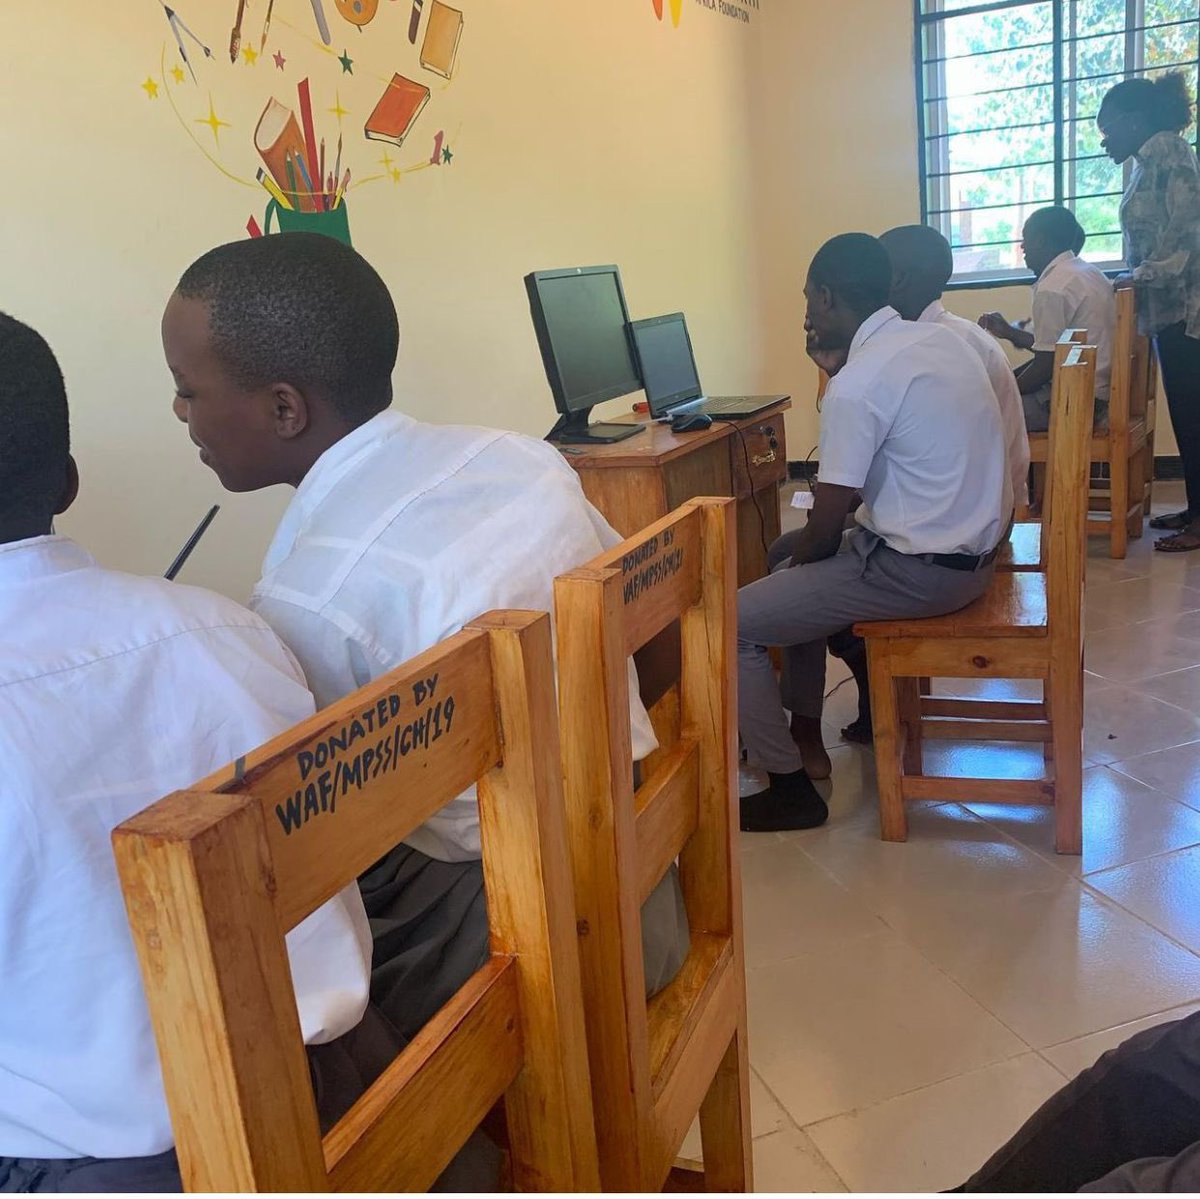 Additionally, there are diverse assessments available for students to gauge their abilities.
.
.

#readtanzania #jifunzekwakusoma #somaconnect #library #maktaba #book #books #teacher #readingbooks #reading #secondaryschool #highschool #tie #somaconnect #elearning #digital